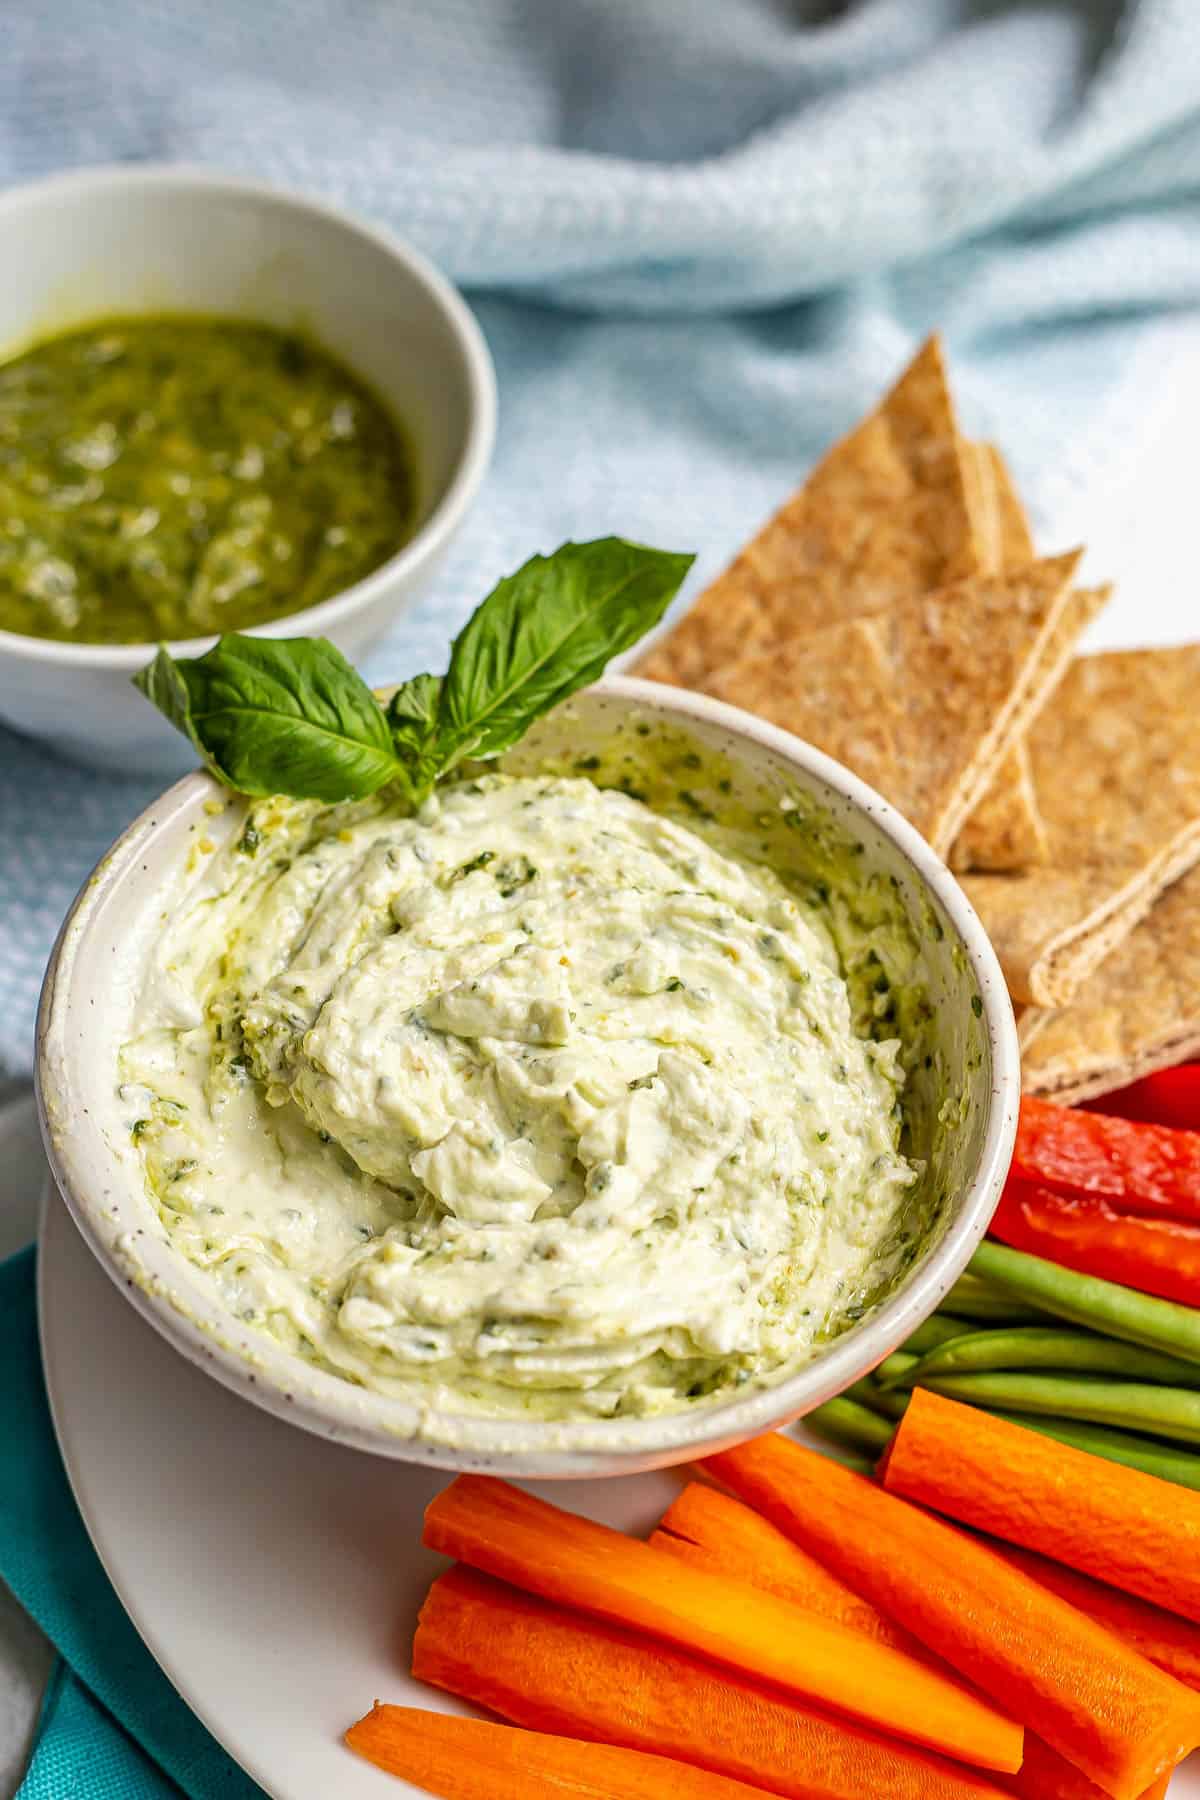 A pesto Greek yogurt dip served in a bowl with a garnish of basil and fresh veggies and pita triangles for dipping.